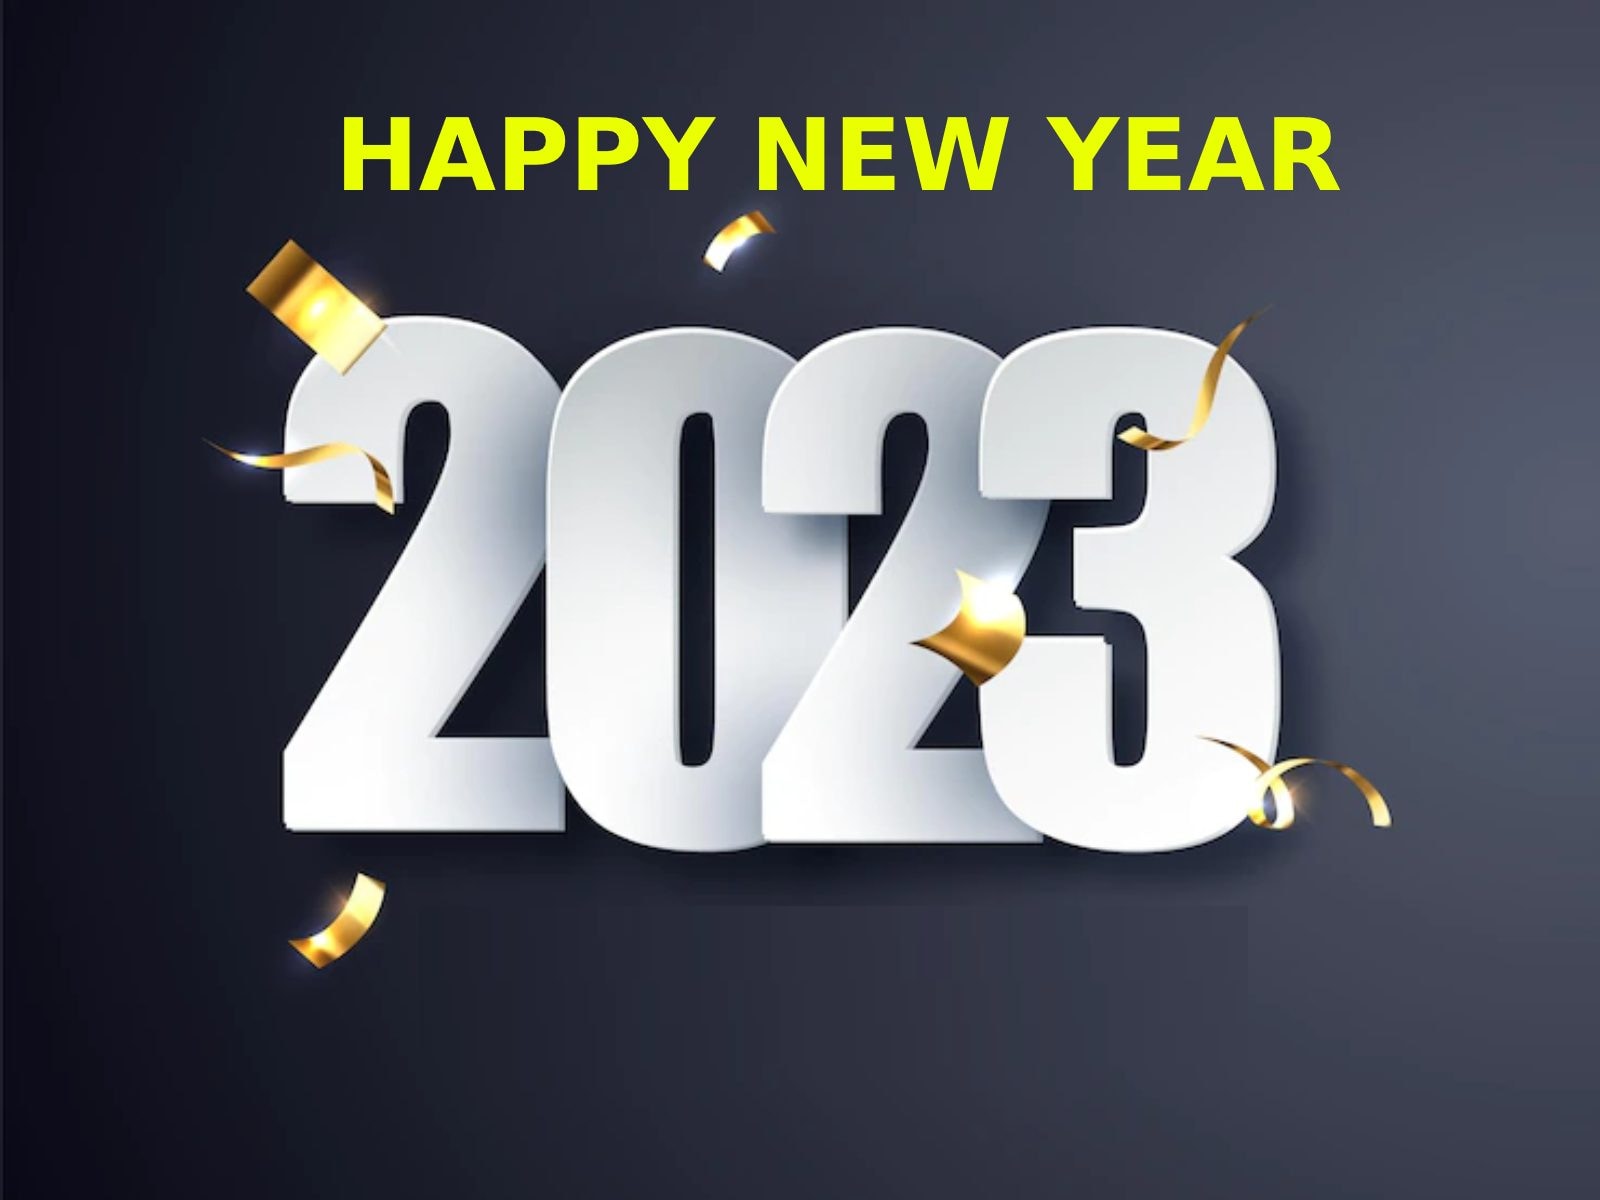 Happy New Year 2022: Wishes, Quotes, Messages, WhatsApp Status, Wallpaper,  Images